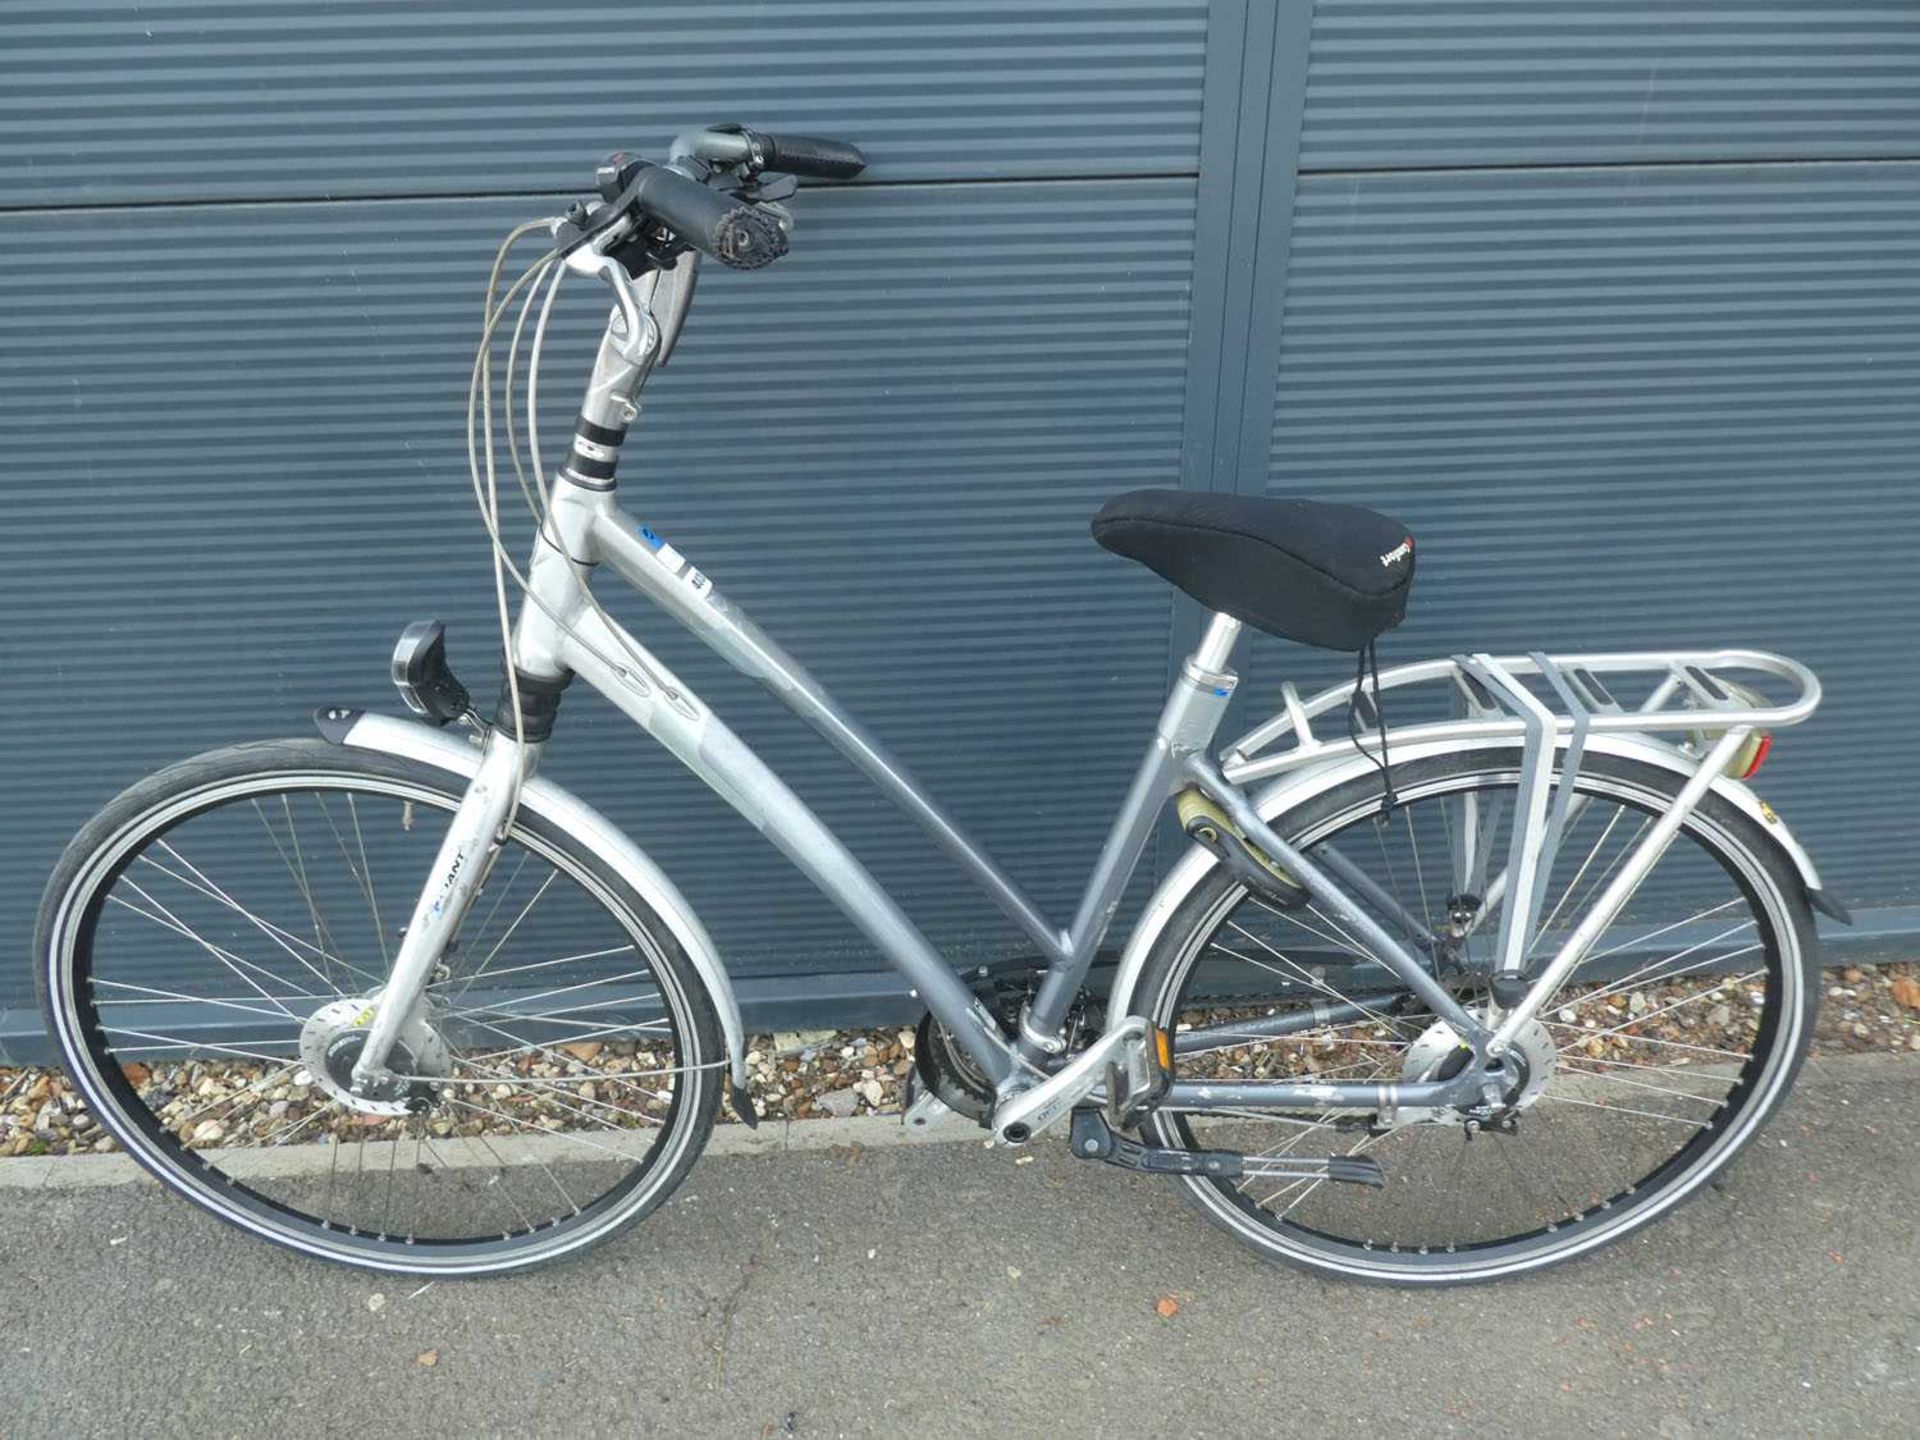 Giant ladies cycle in two tone grey